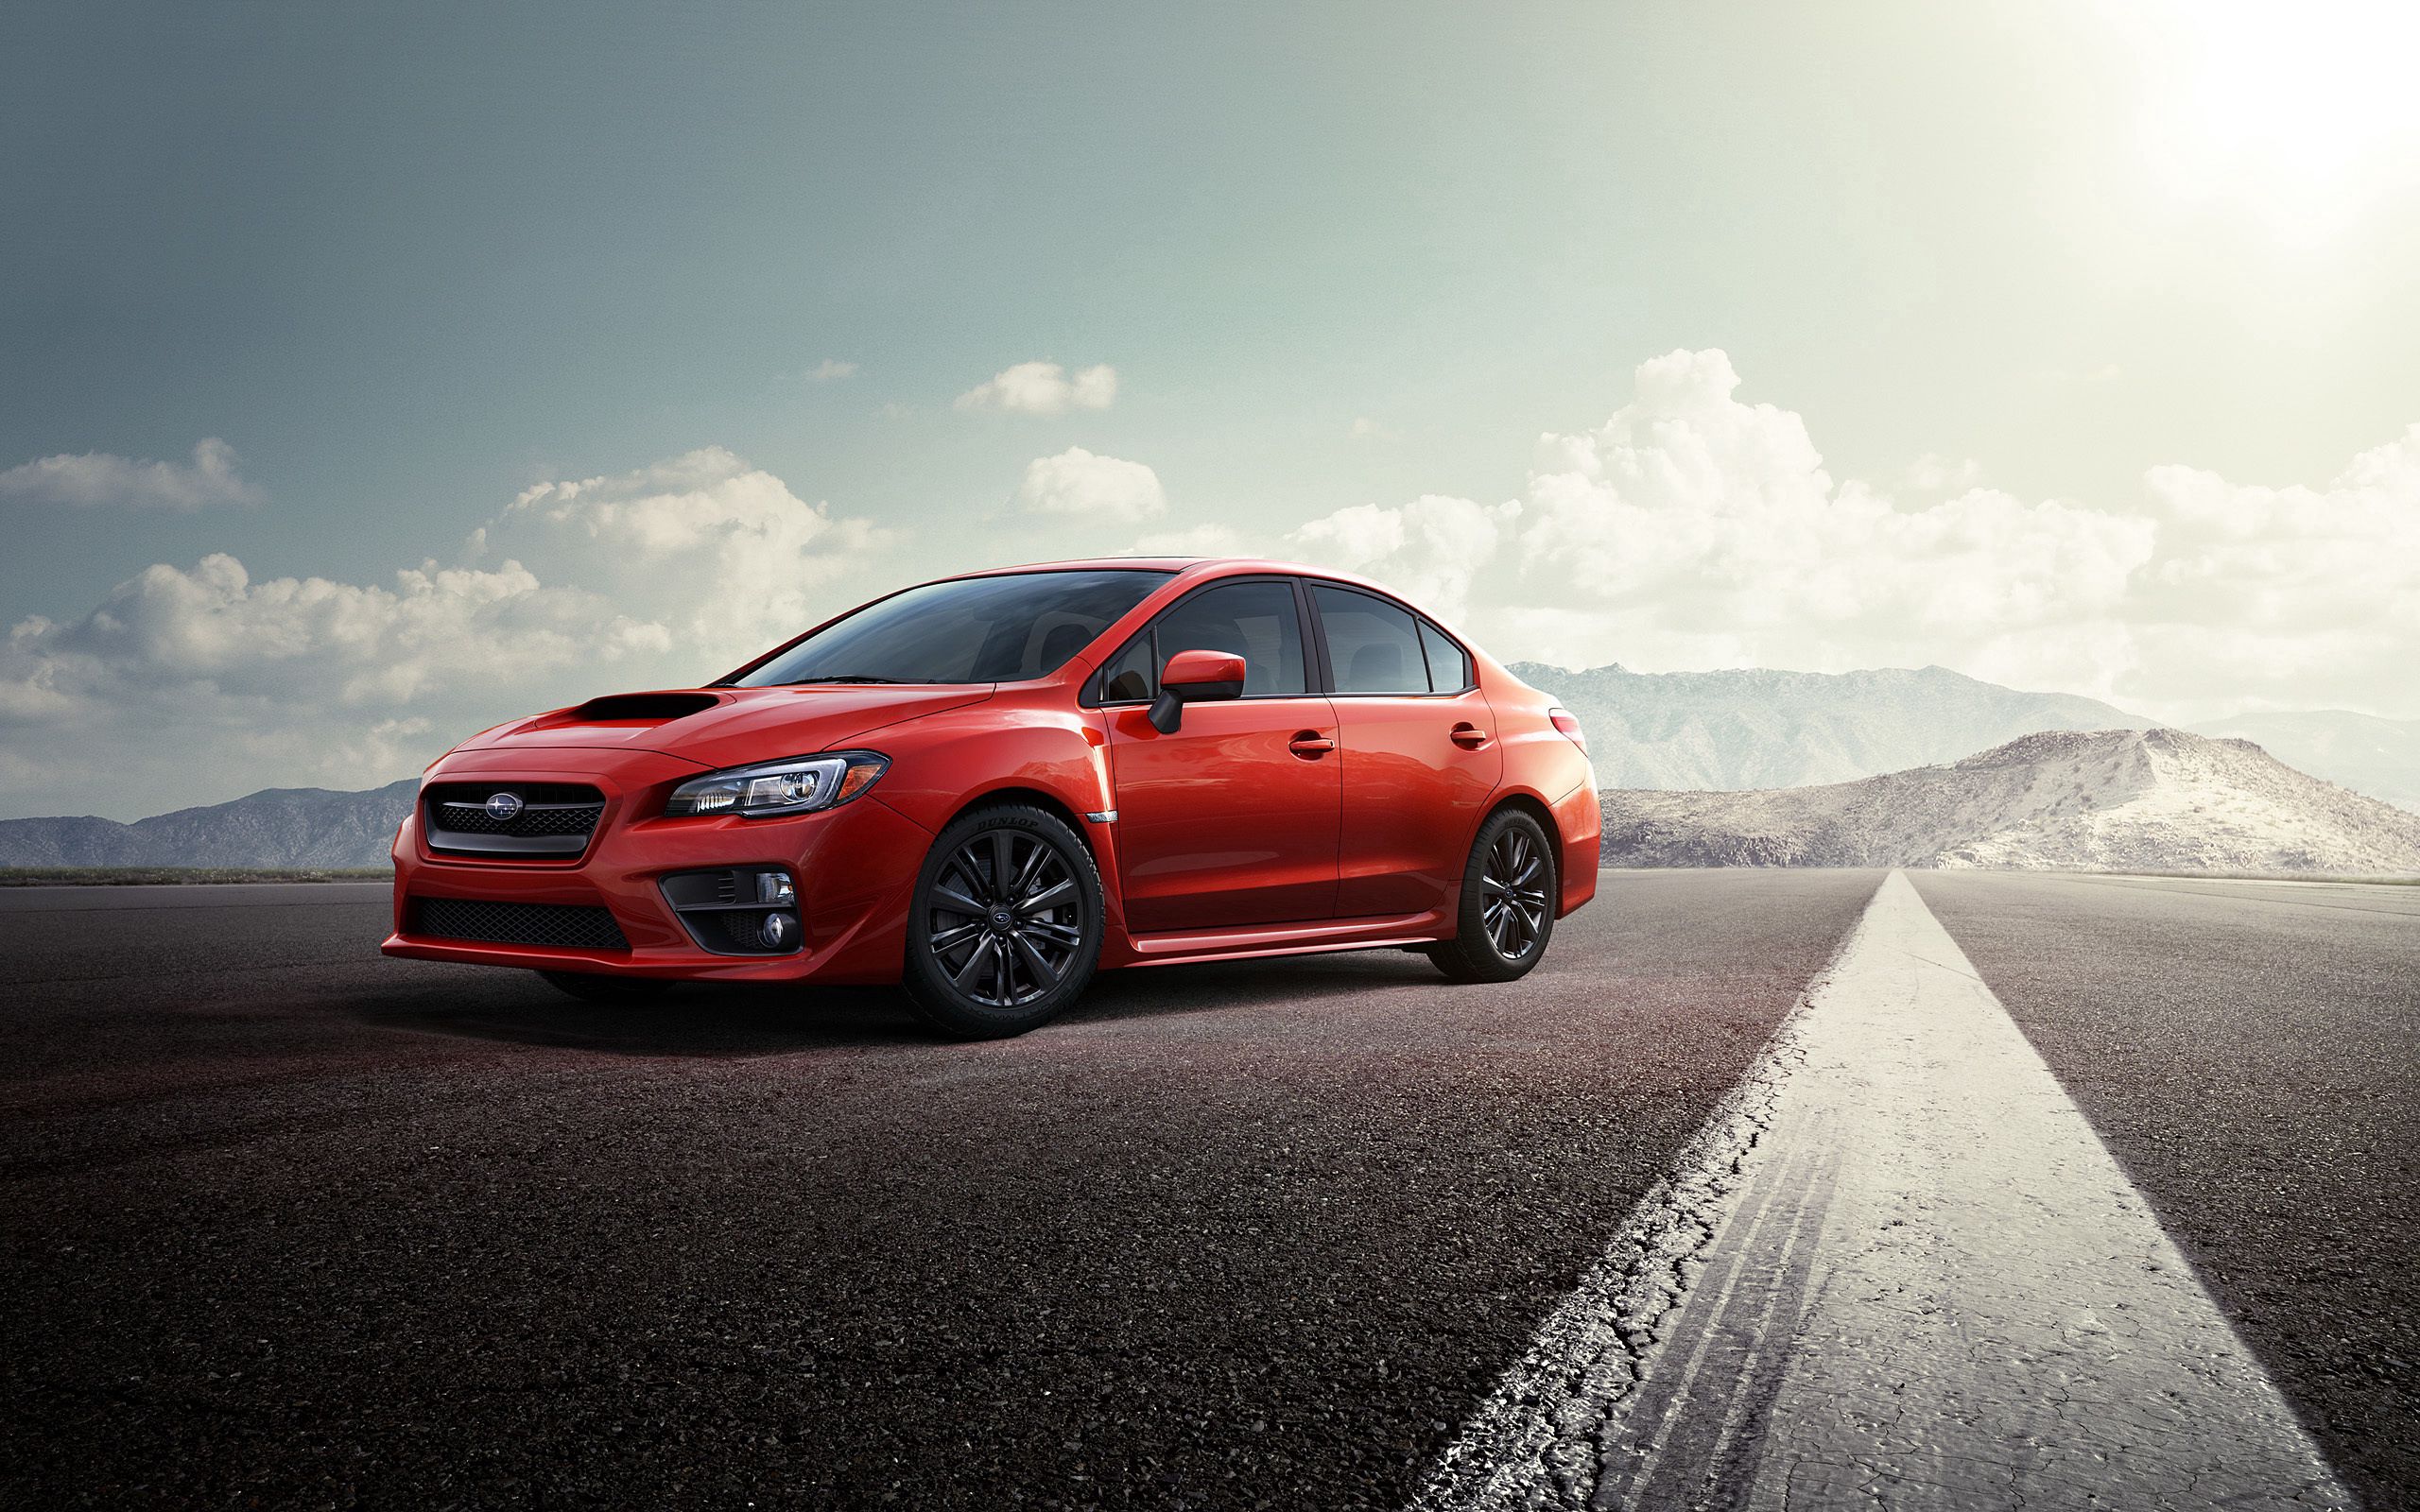 Download wallpaper 2560x1600 subaru, red, road, side view hd background